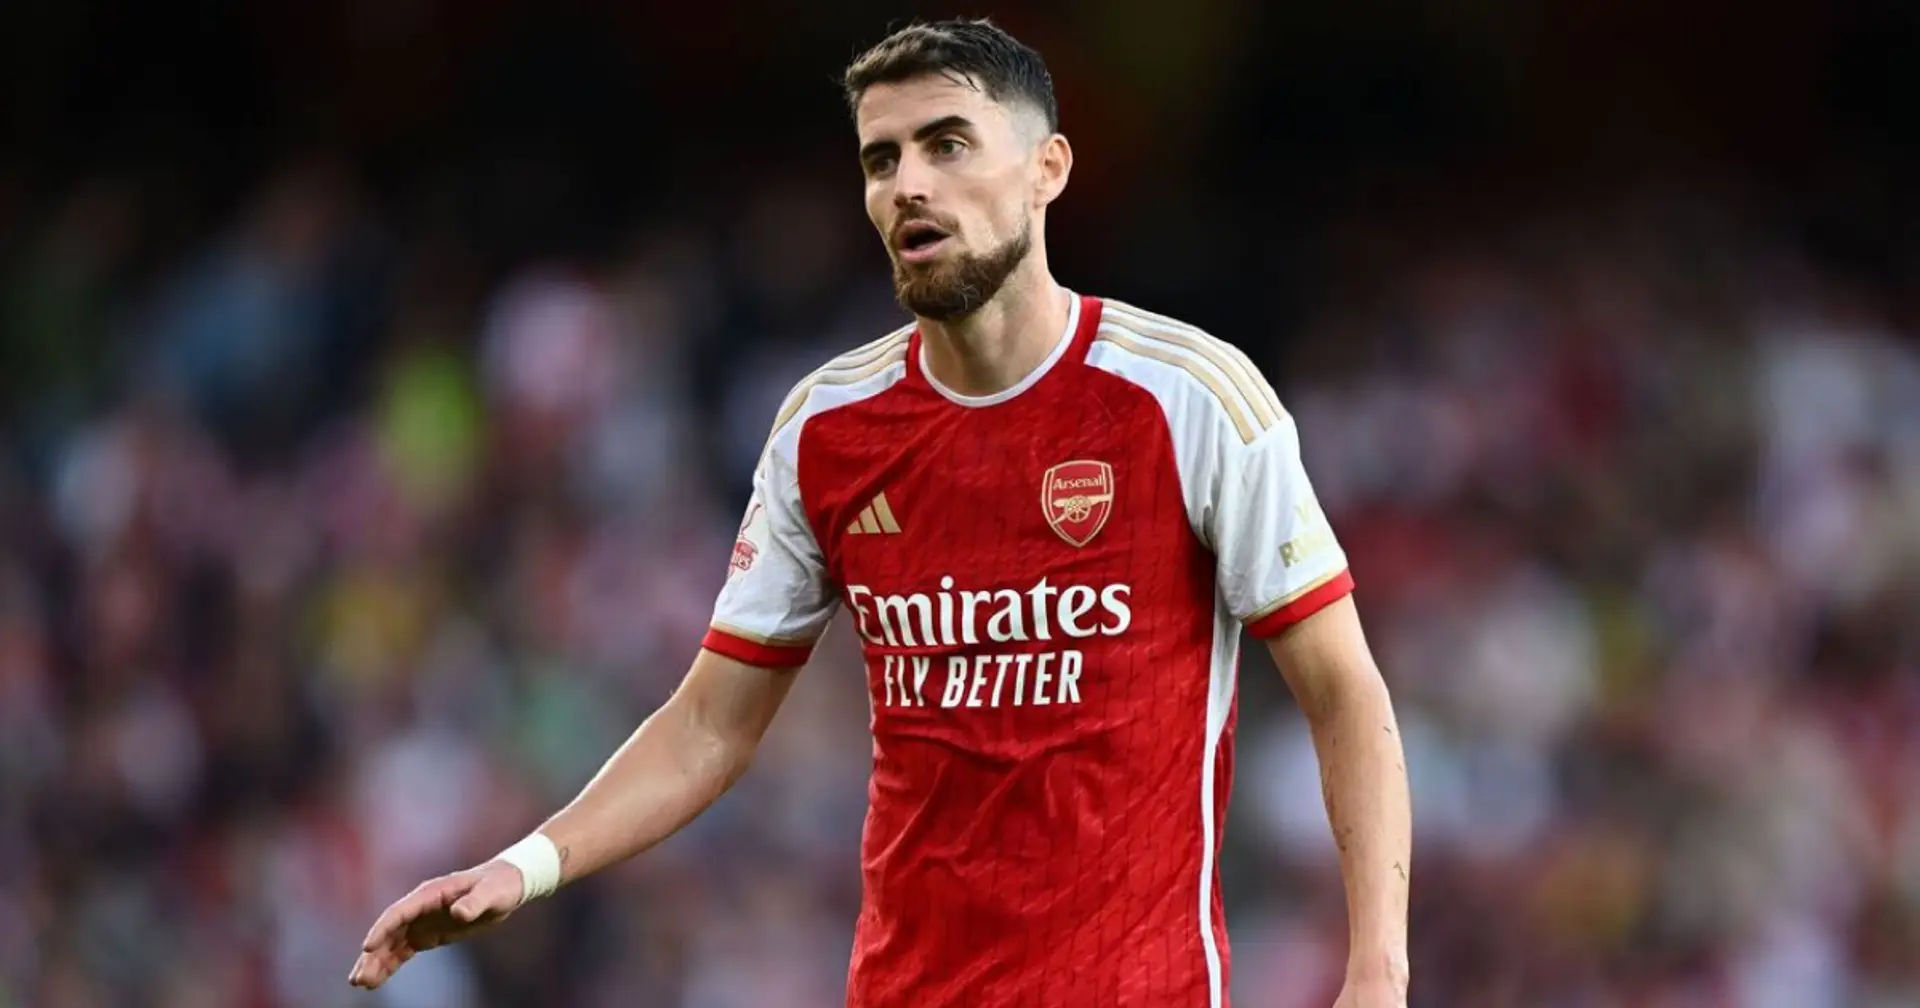 'I'm very much in doubt': Jorginho on his next move after Arsenal contract expires in summer 2024 